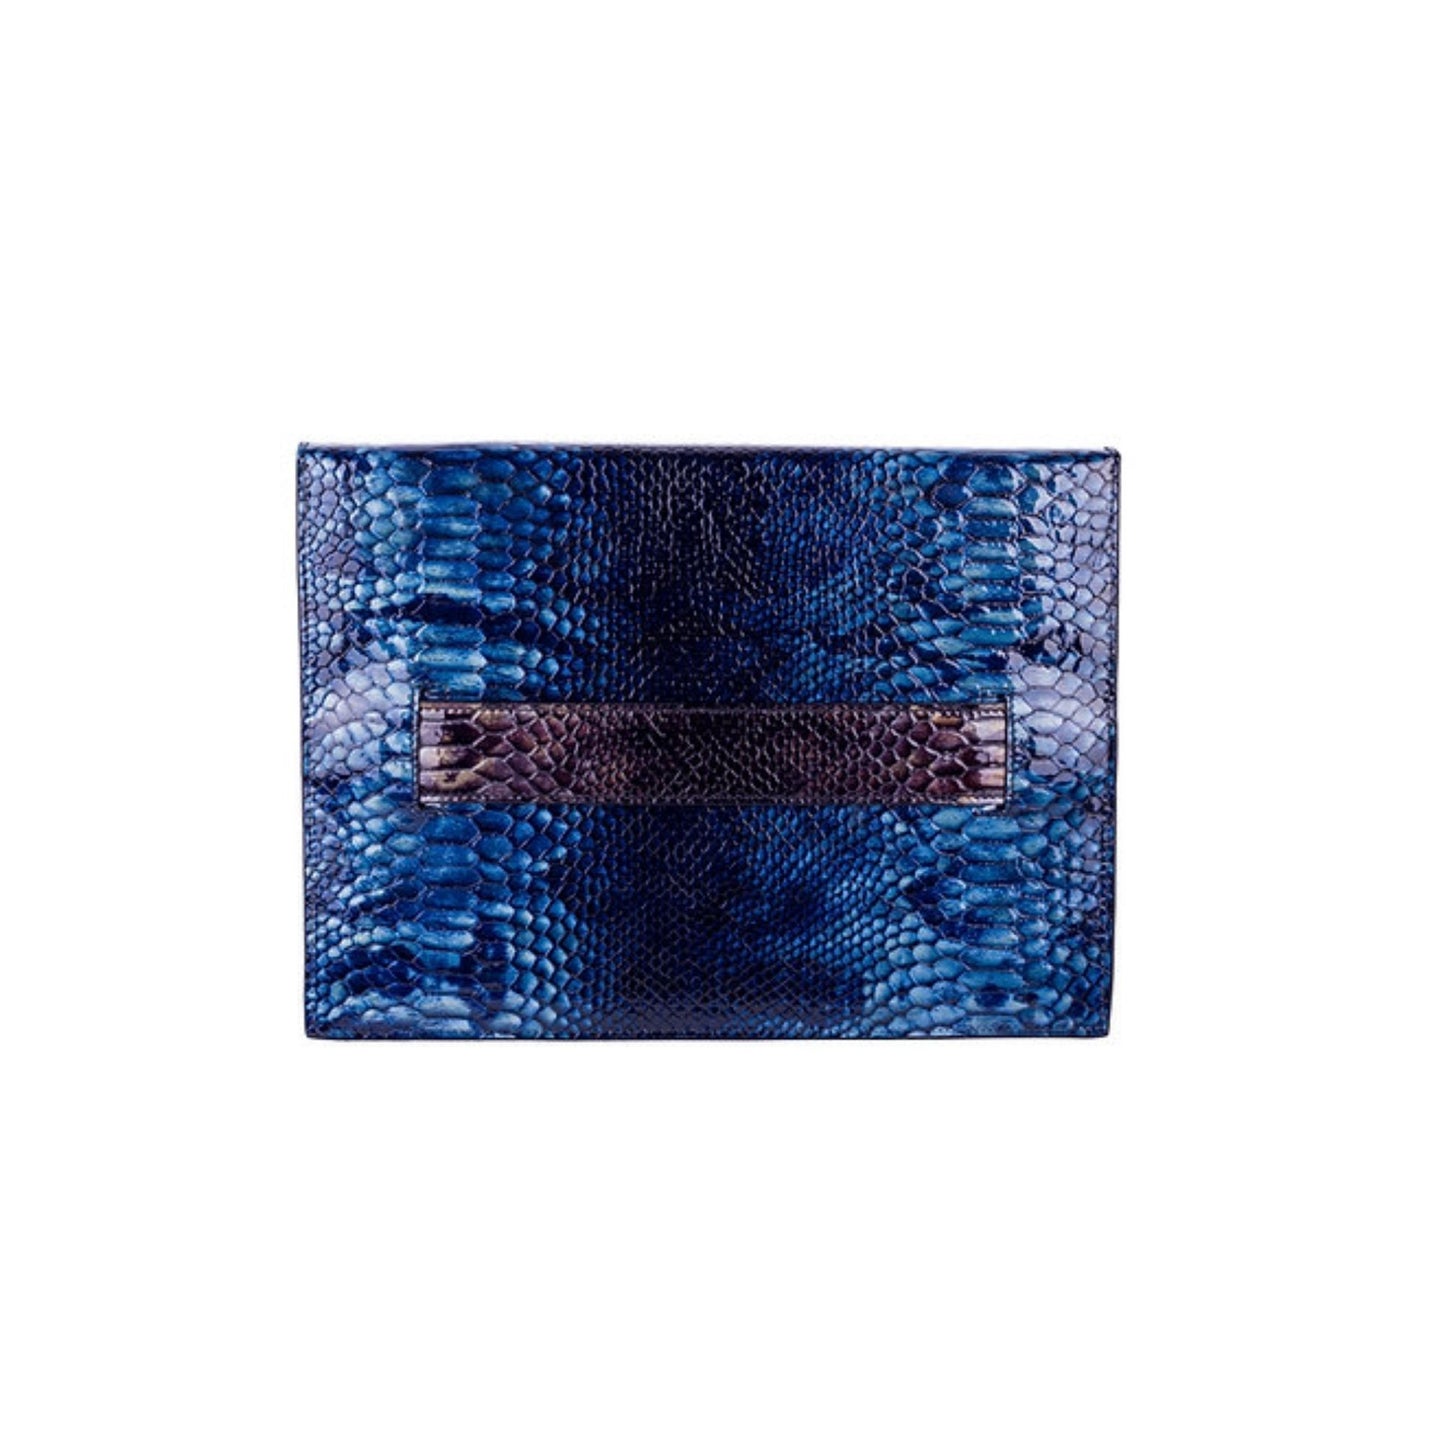 Kilani - Sapphire Snake Leather Clutch Bag | Made in Montreal